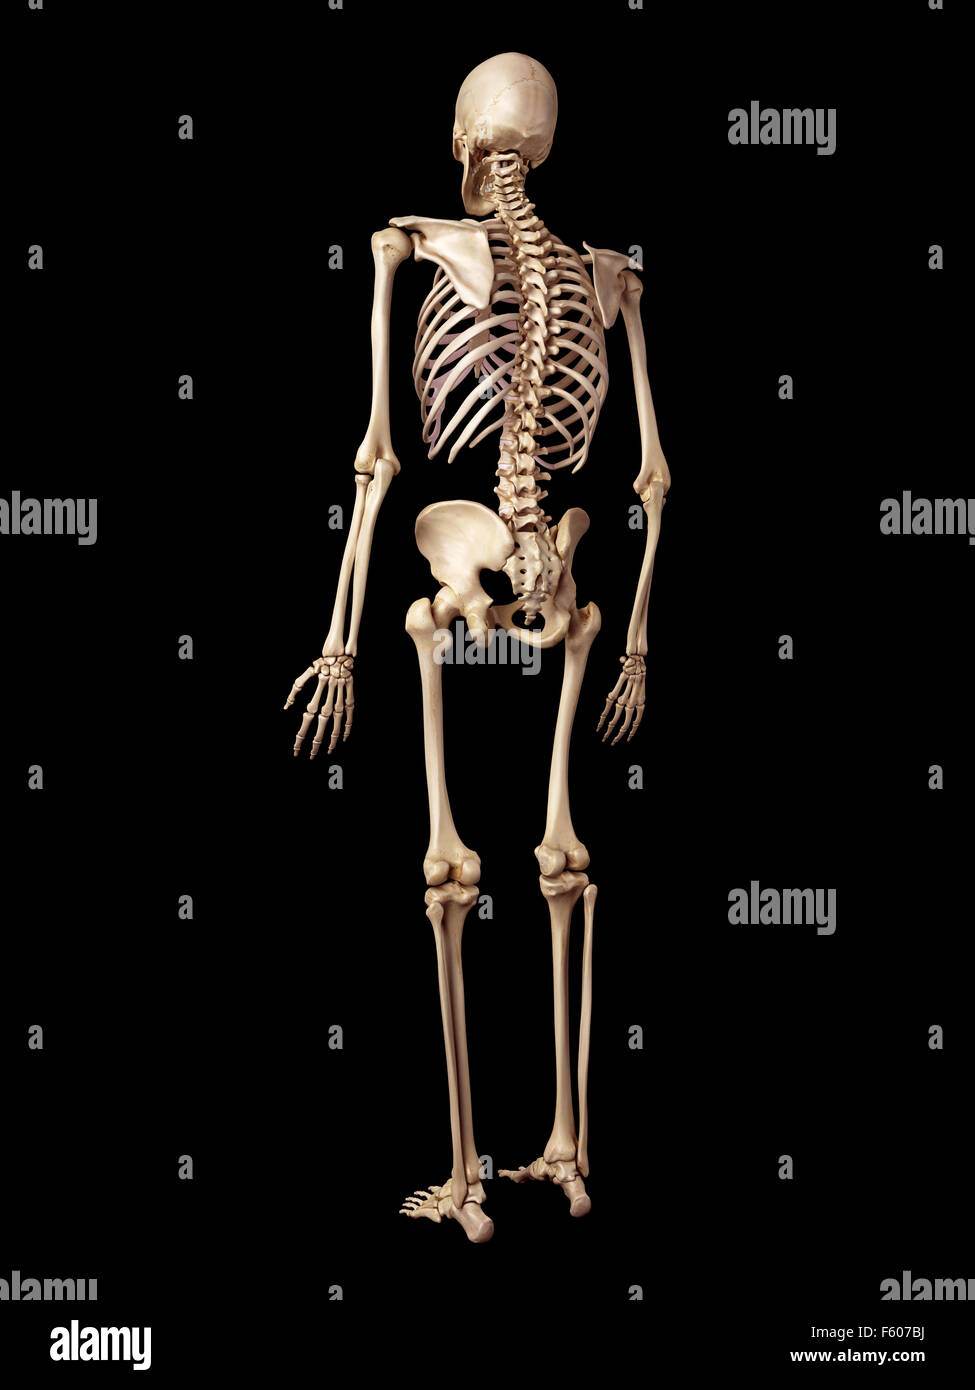 medical accurate illustration of the human skeleton Stock Photo